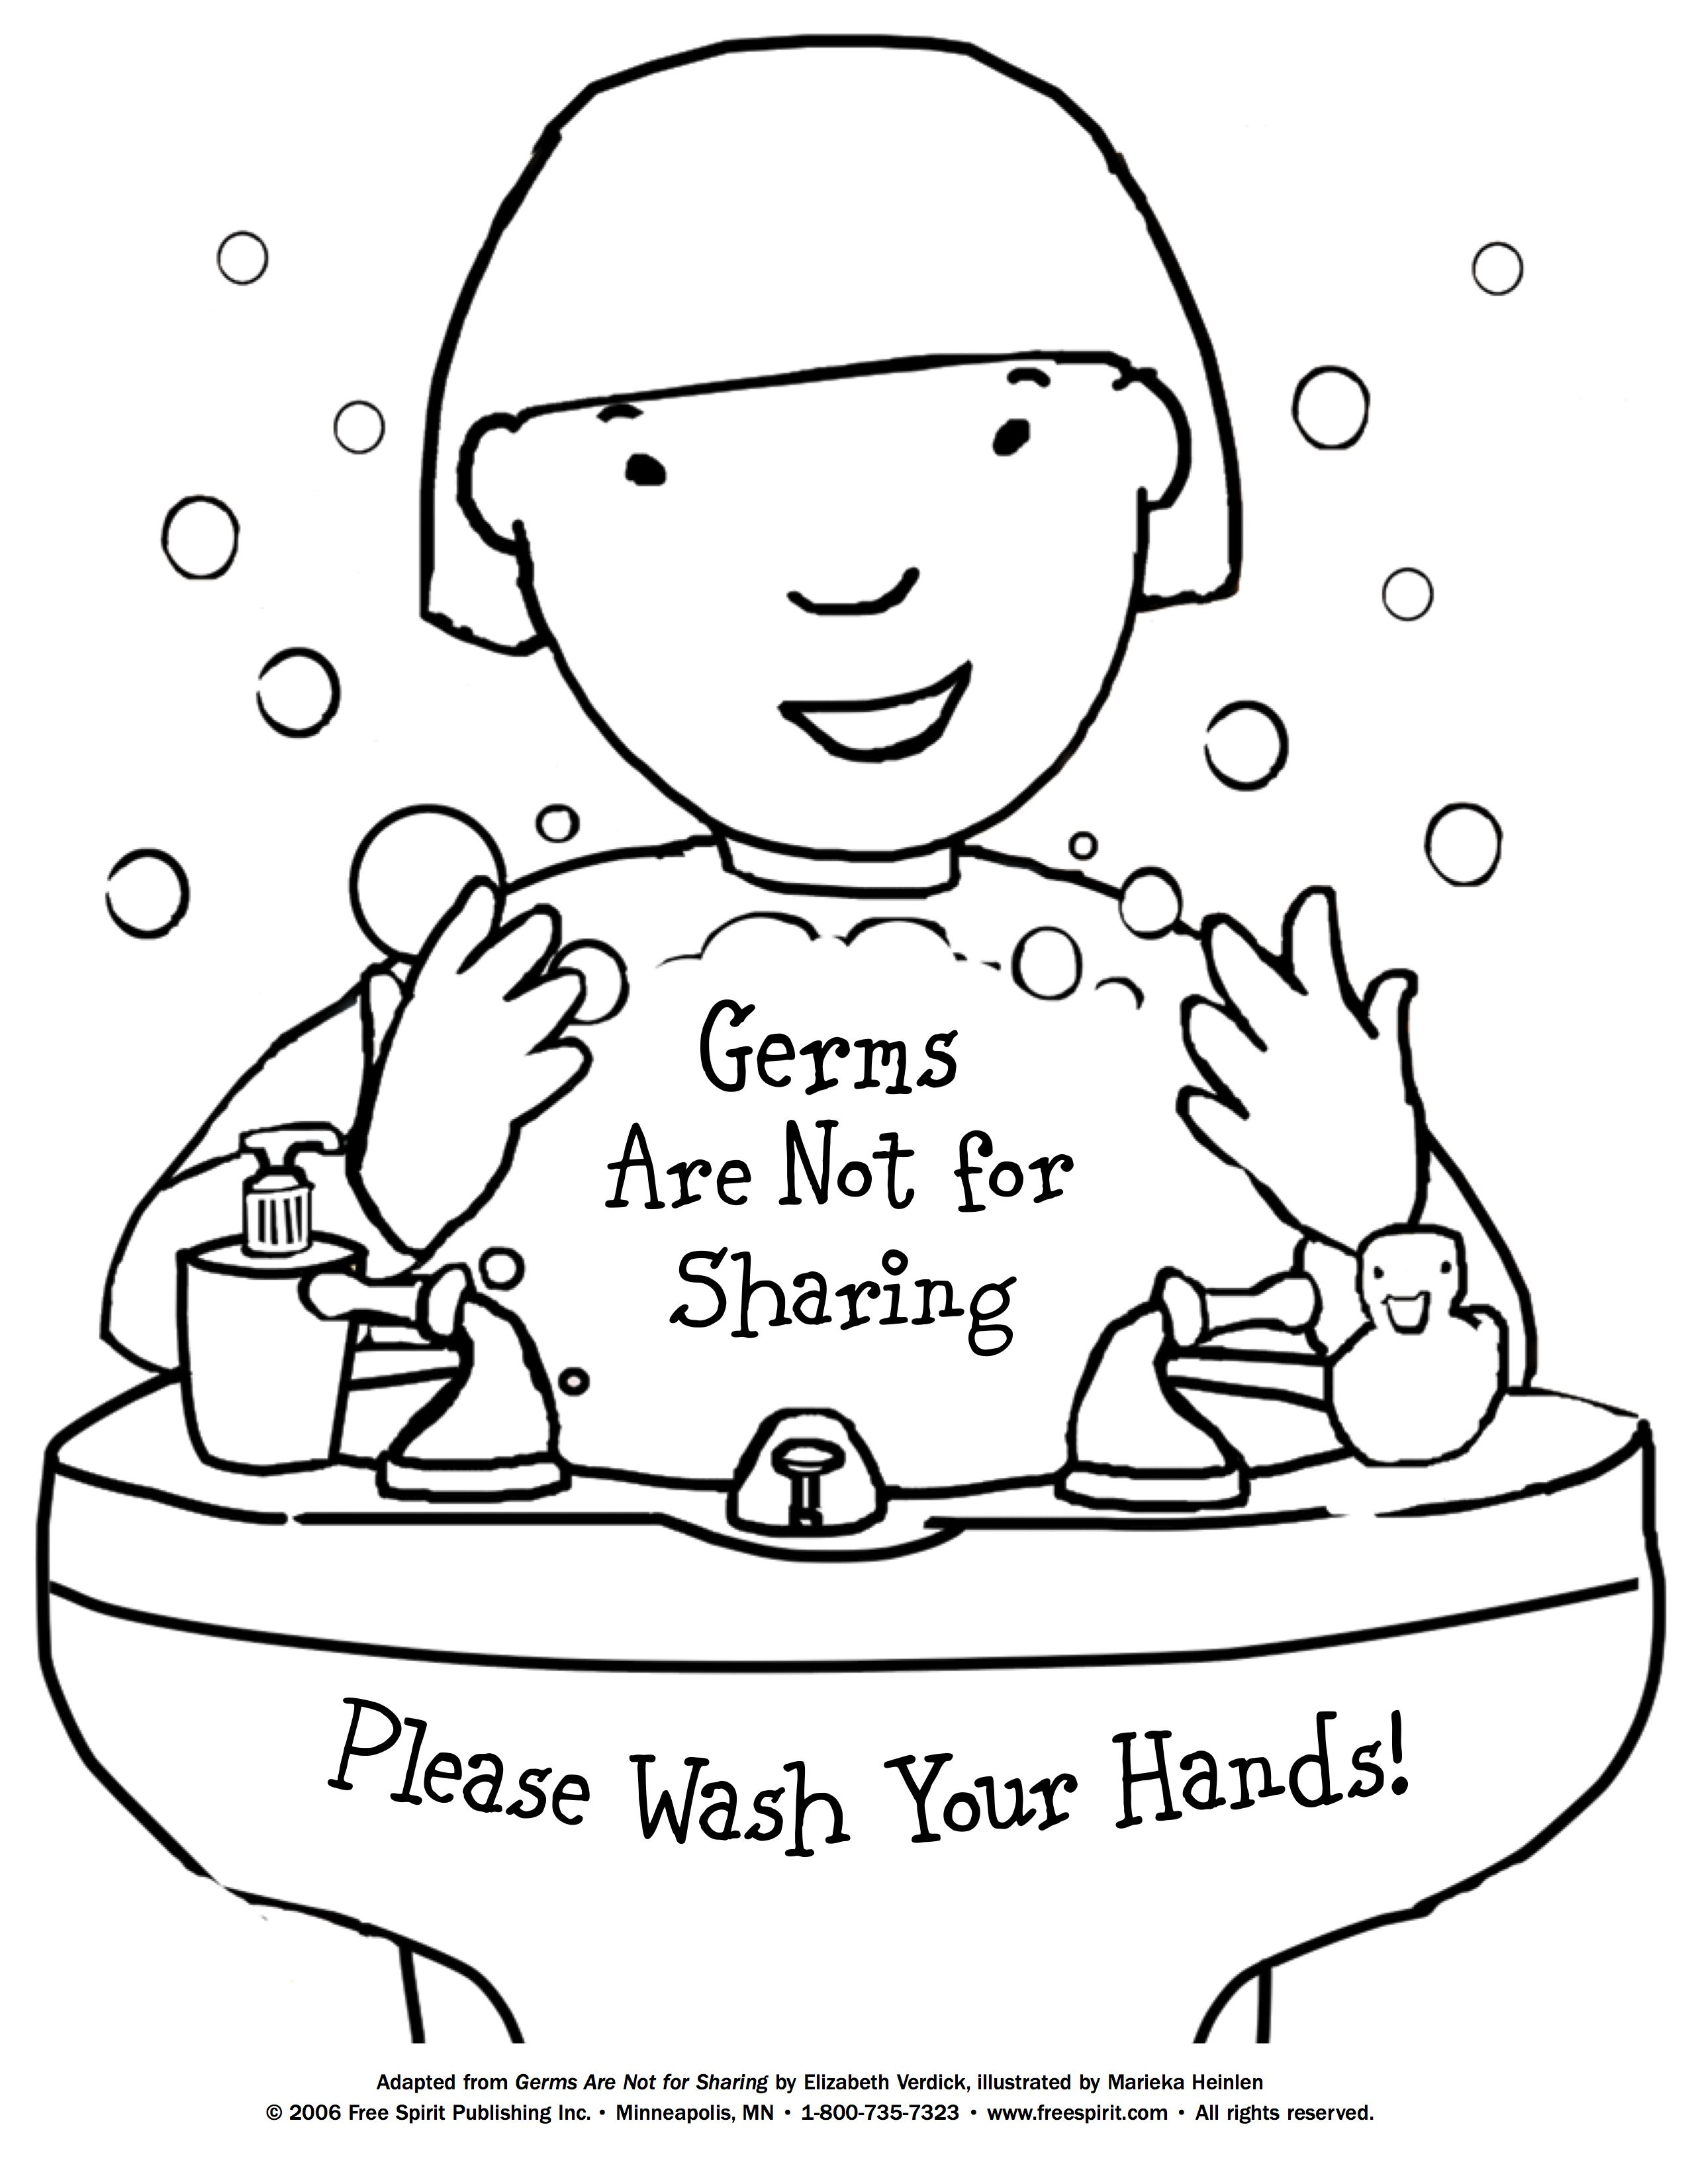 Free Printable Coloring Page To Teach Kids About Hygiene: Germs Are - Free Printable Good Touch Bad Touch Coloring Book